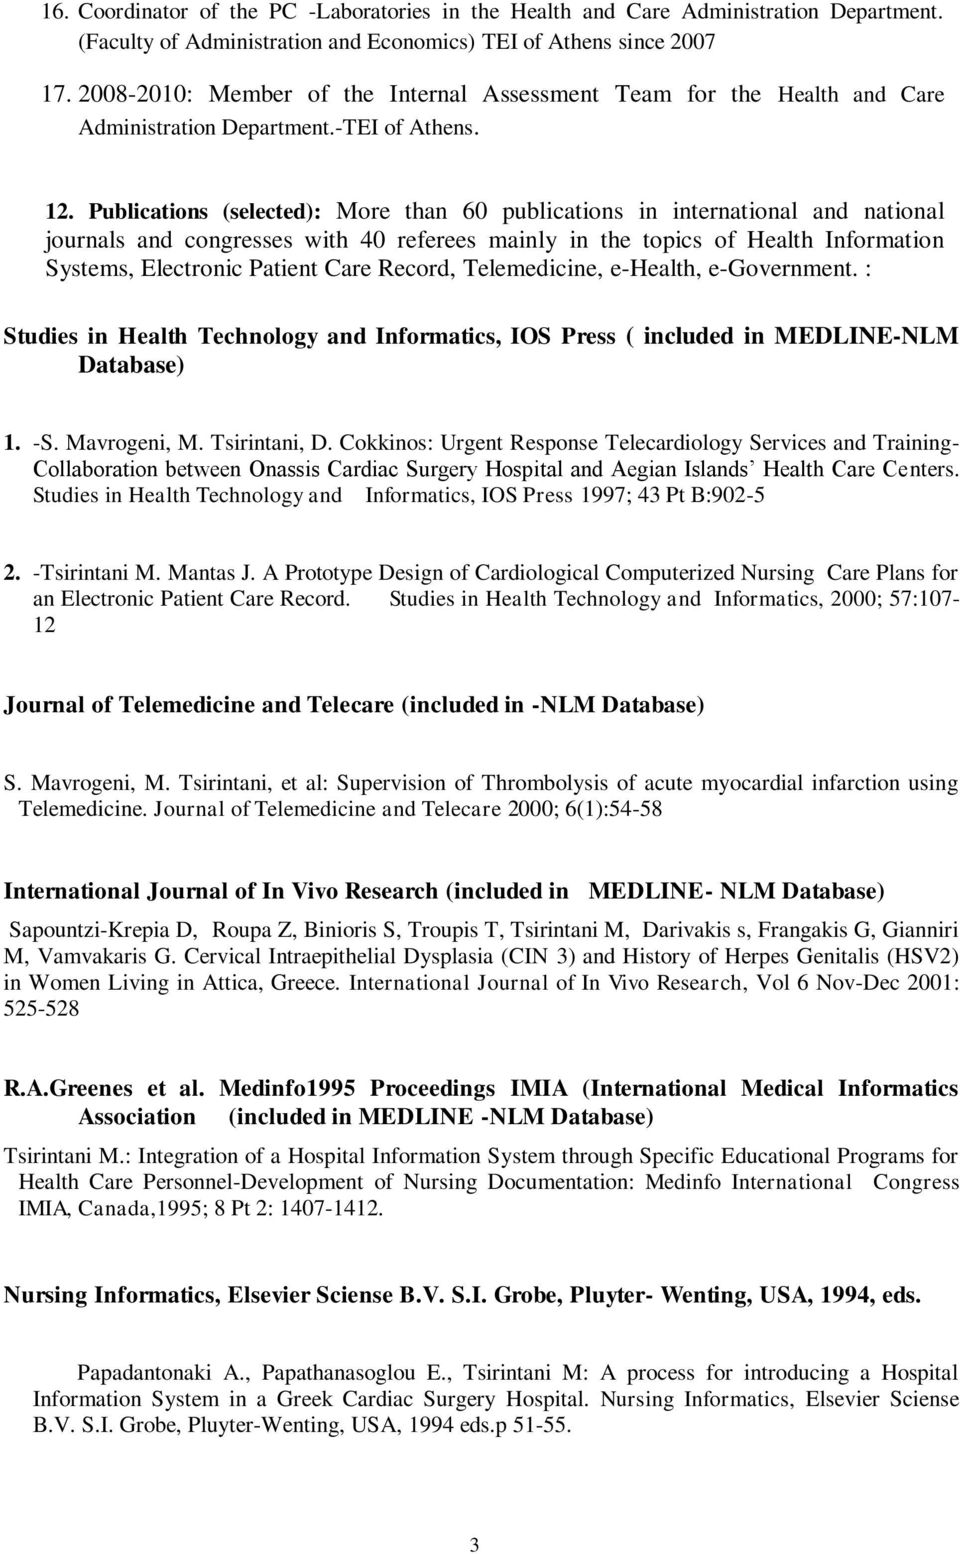 Publications (selected): More than 60 publications in international and national journals and congresses with 40 referees mainly in the topics of Health Information Systems, Electronic Patient Care